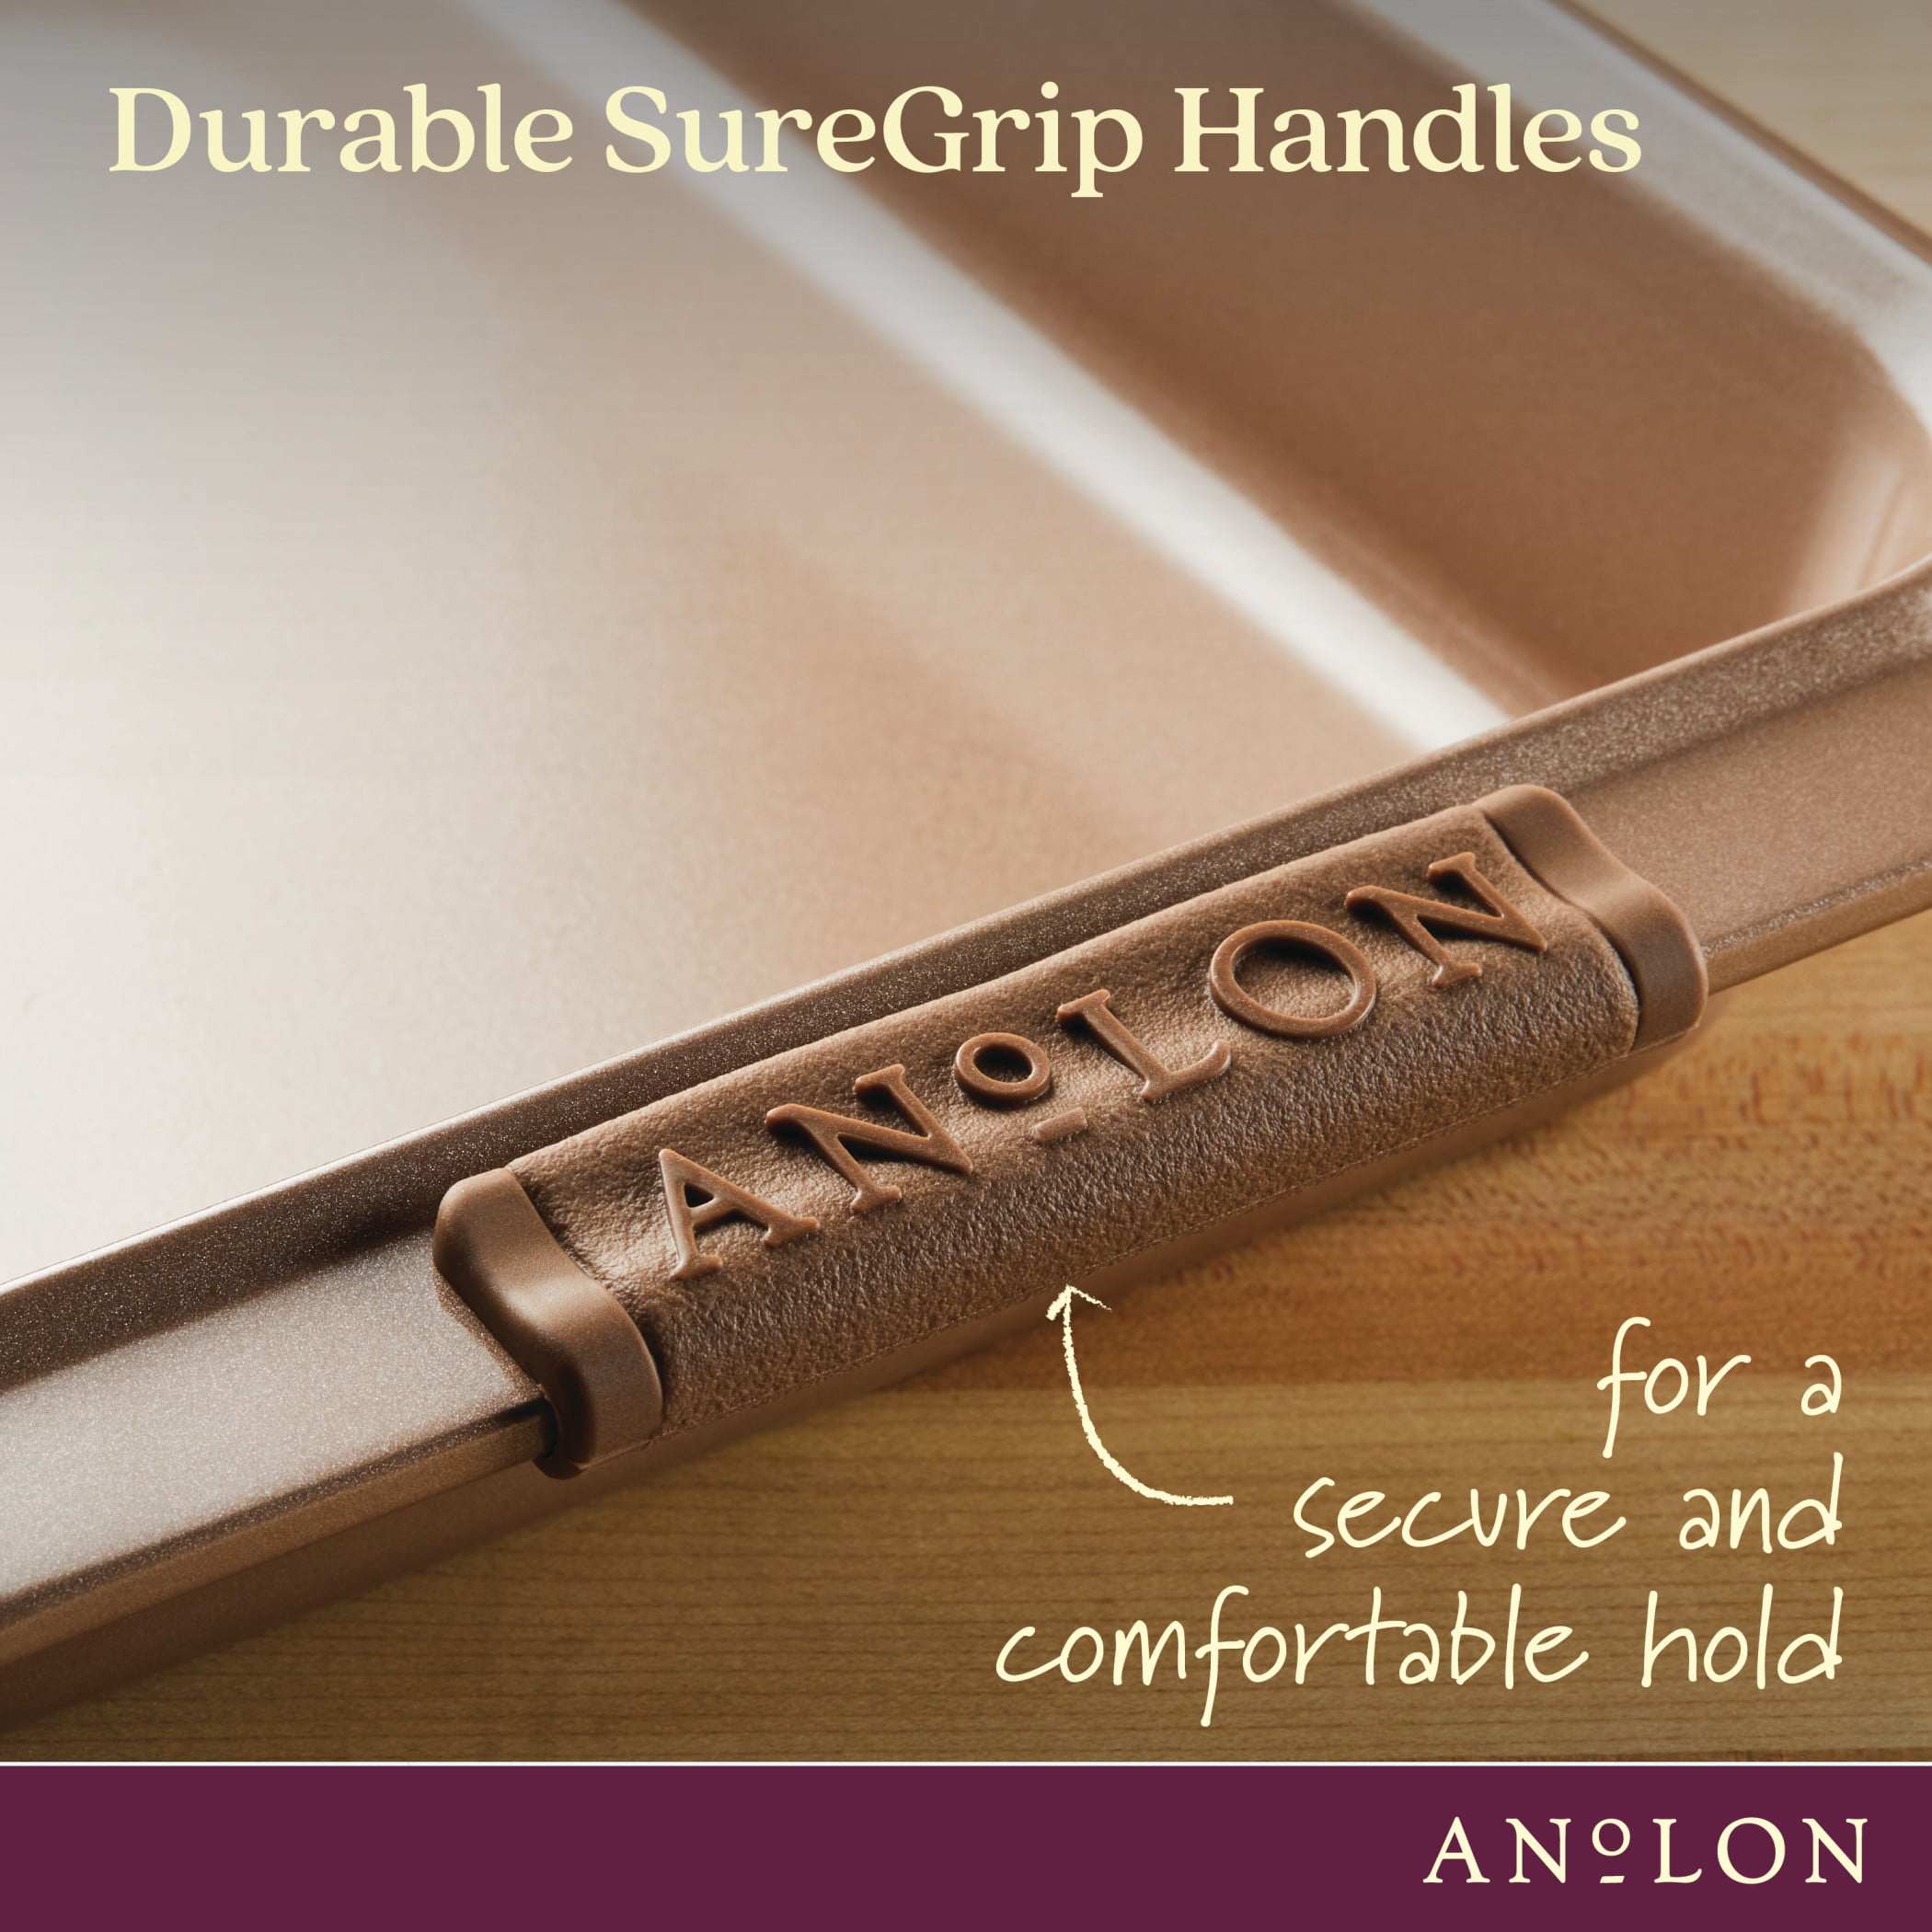 9.5-Inch Fluted Cake Pan – Anolon